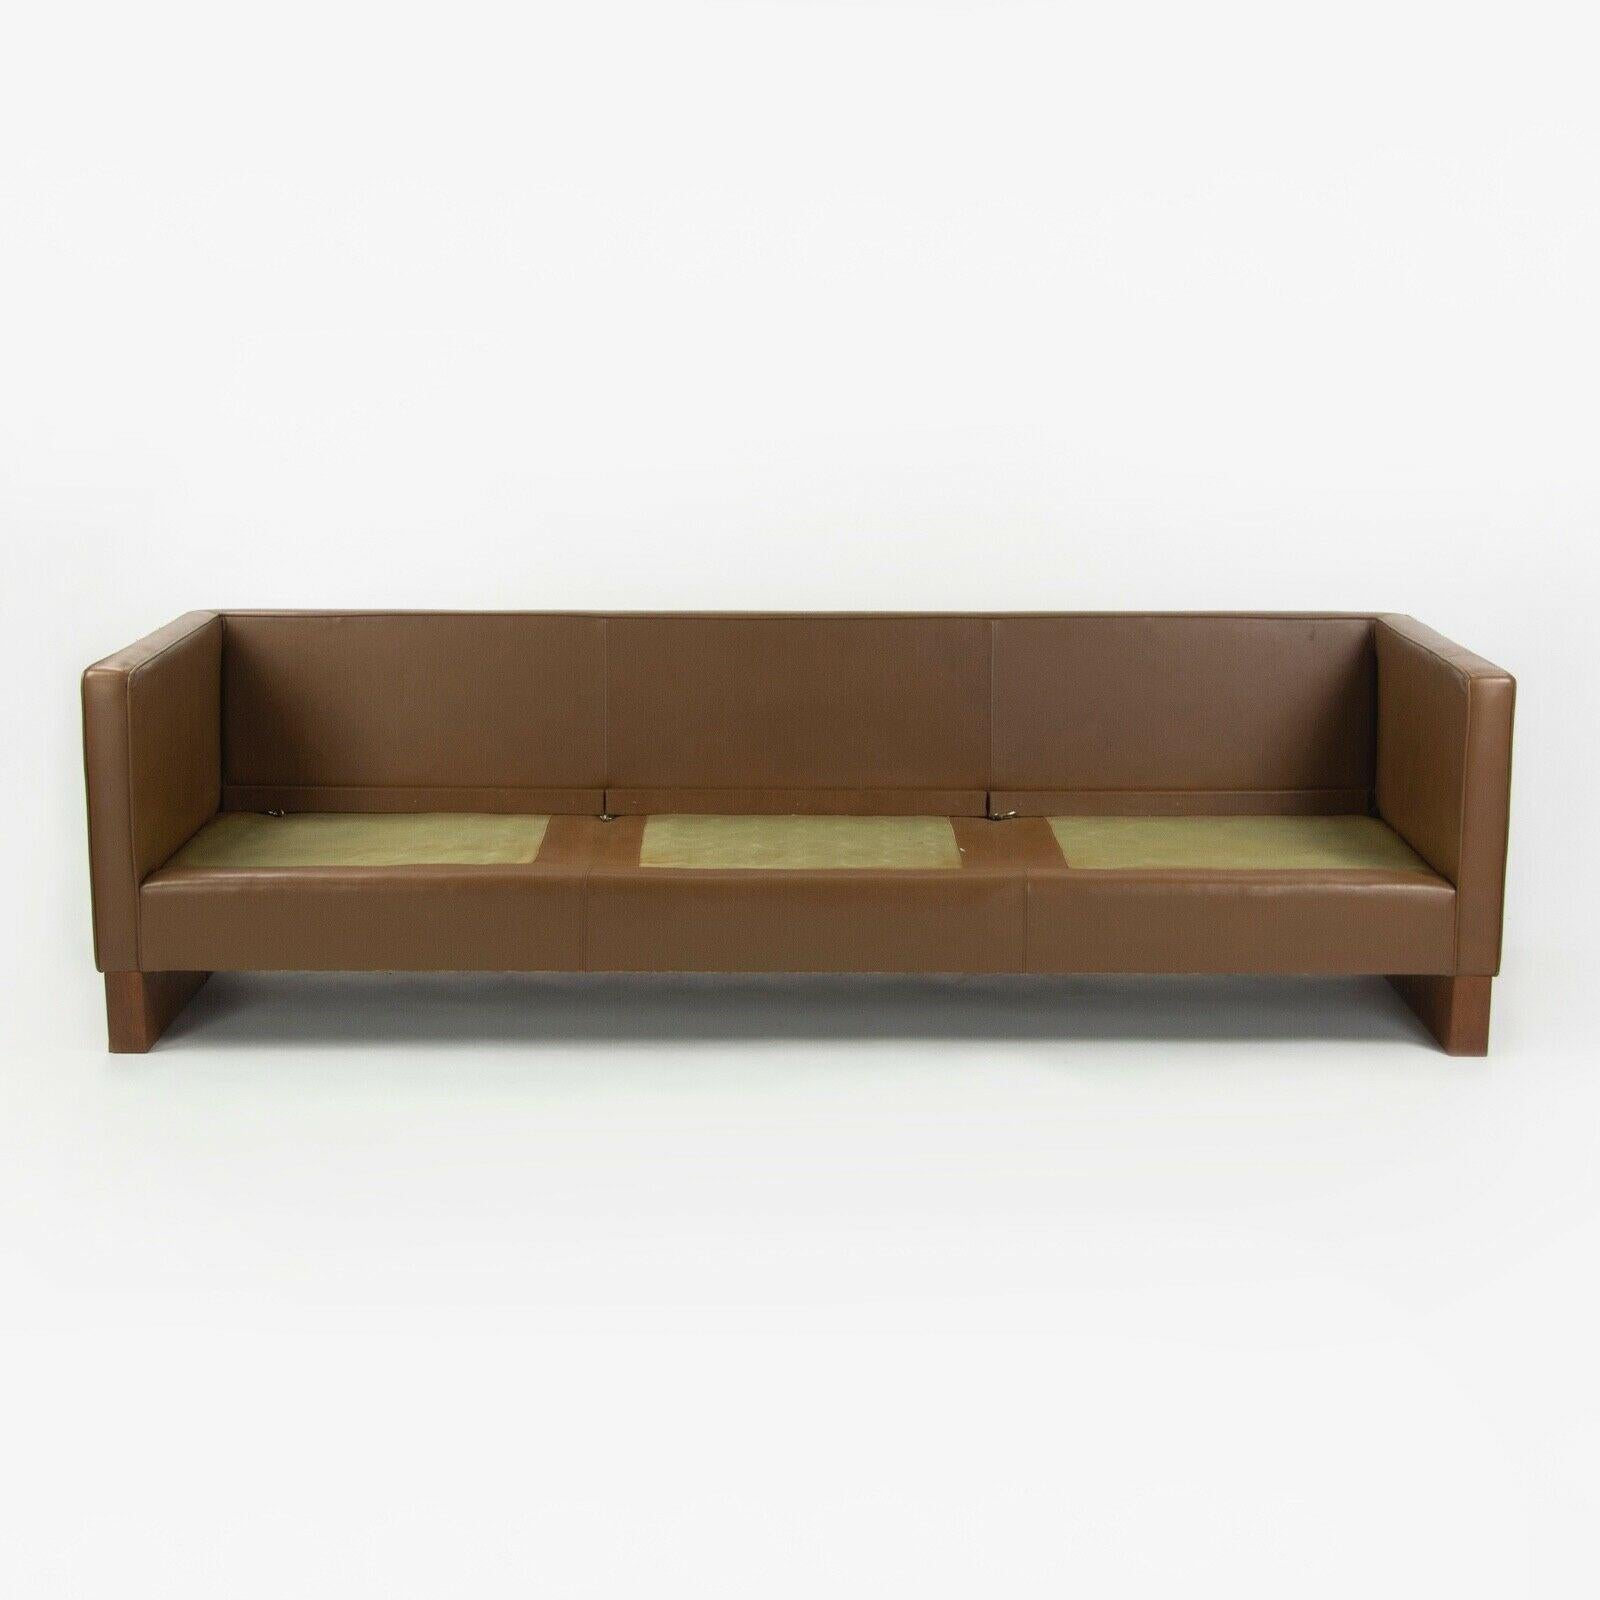 1960s Mies Van Der Rohe for Knoll International Brown Leather Three Seat Sofa For Sale 1